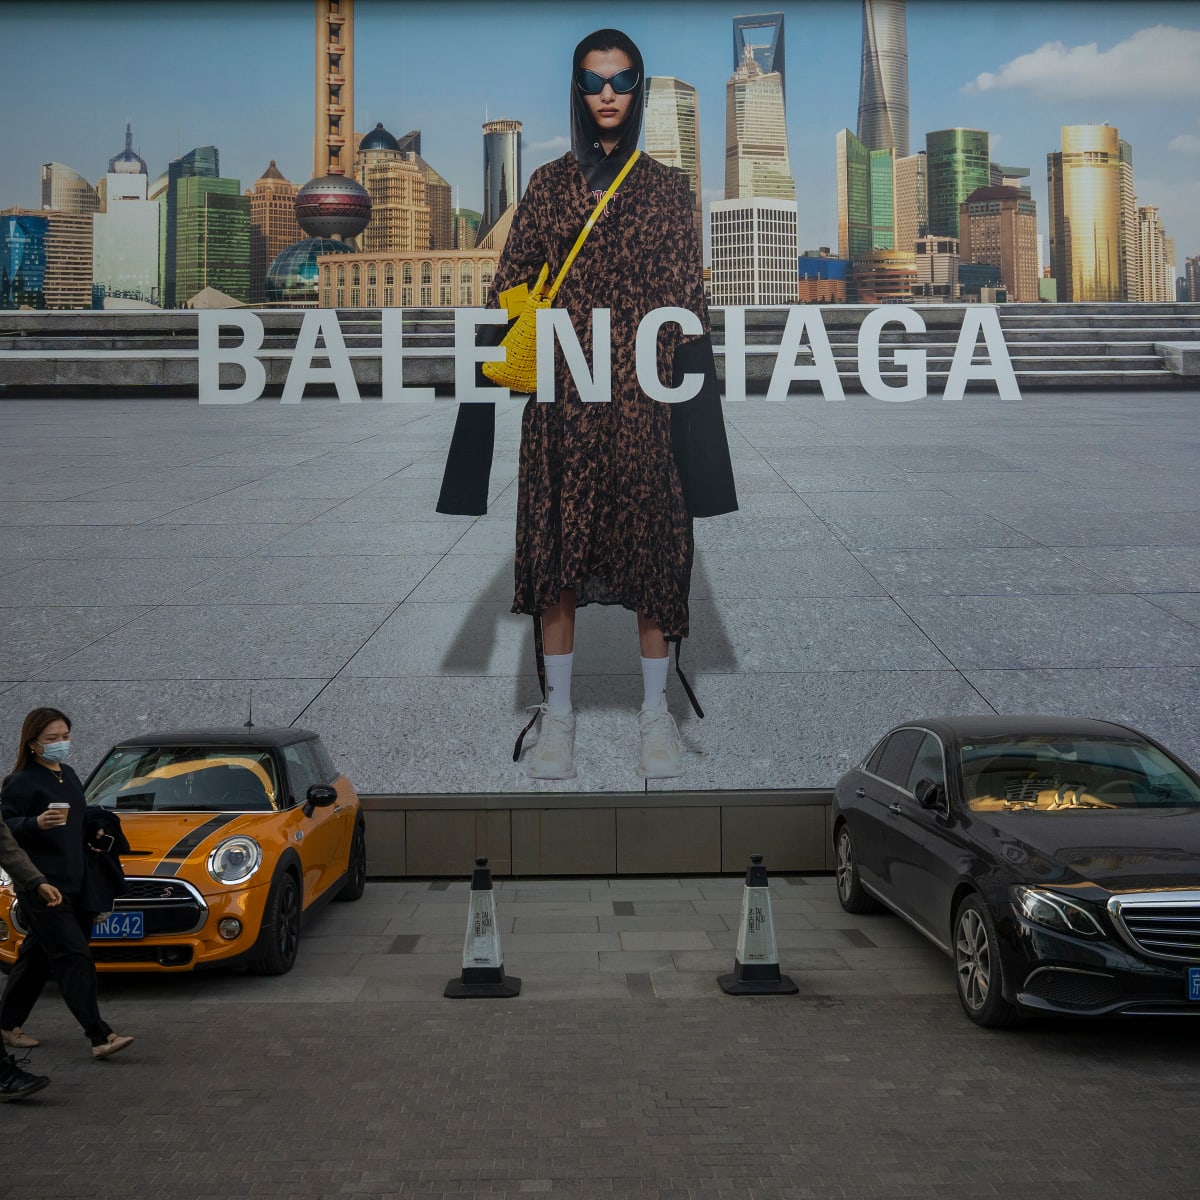 Balenciaga Is the World's Hottest Brand in Q3 of 2021 – Robb Report